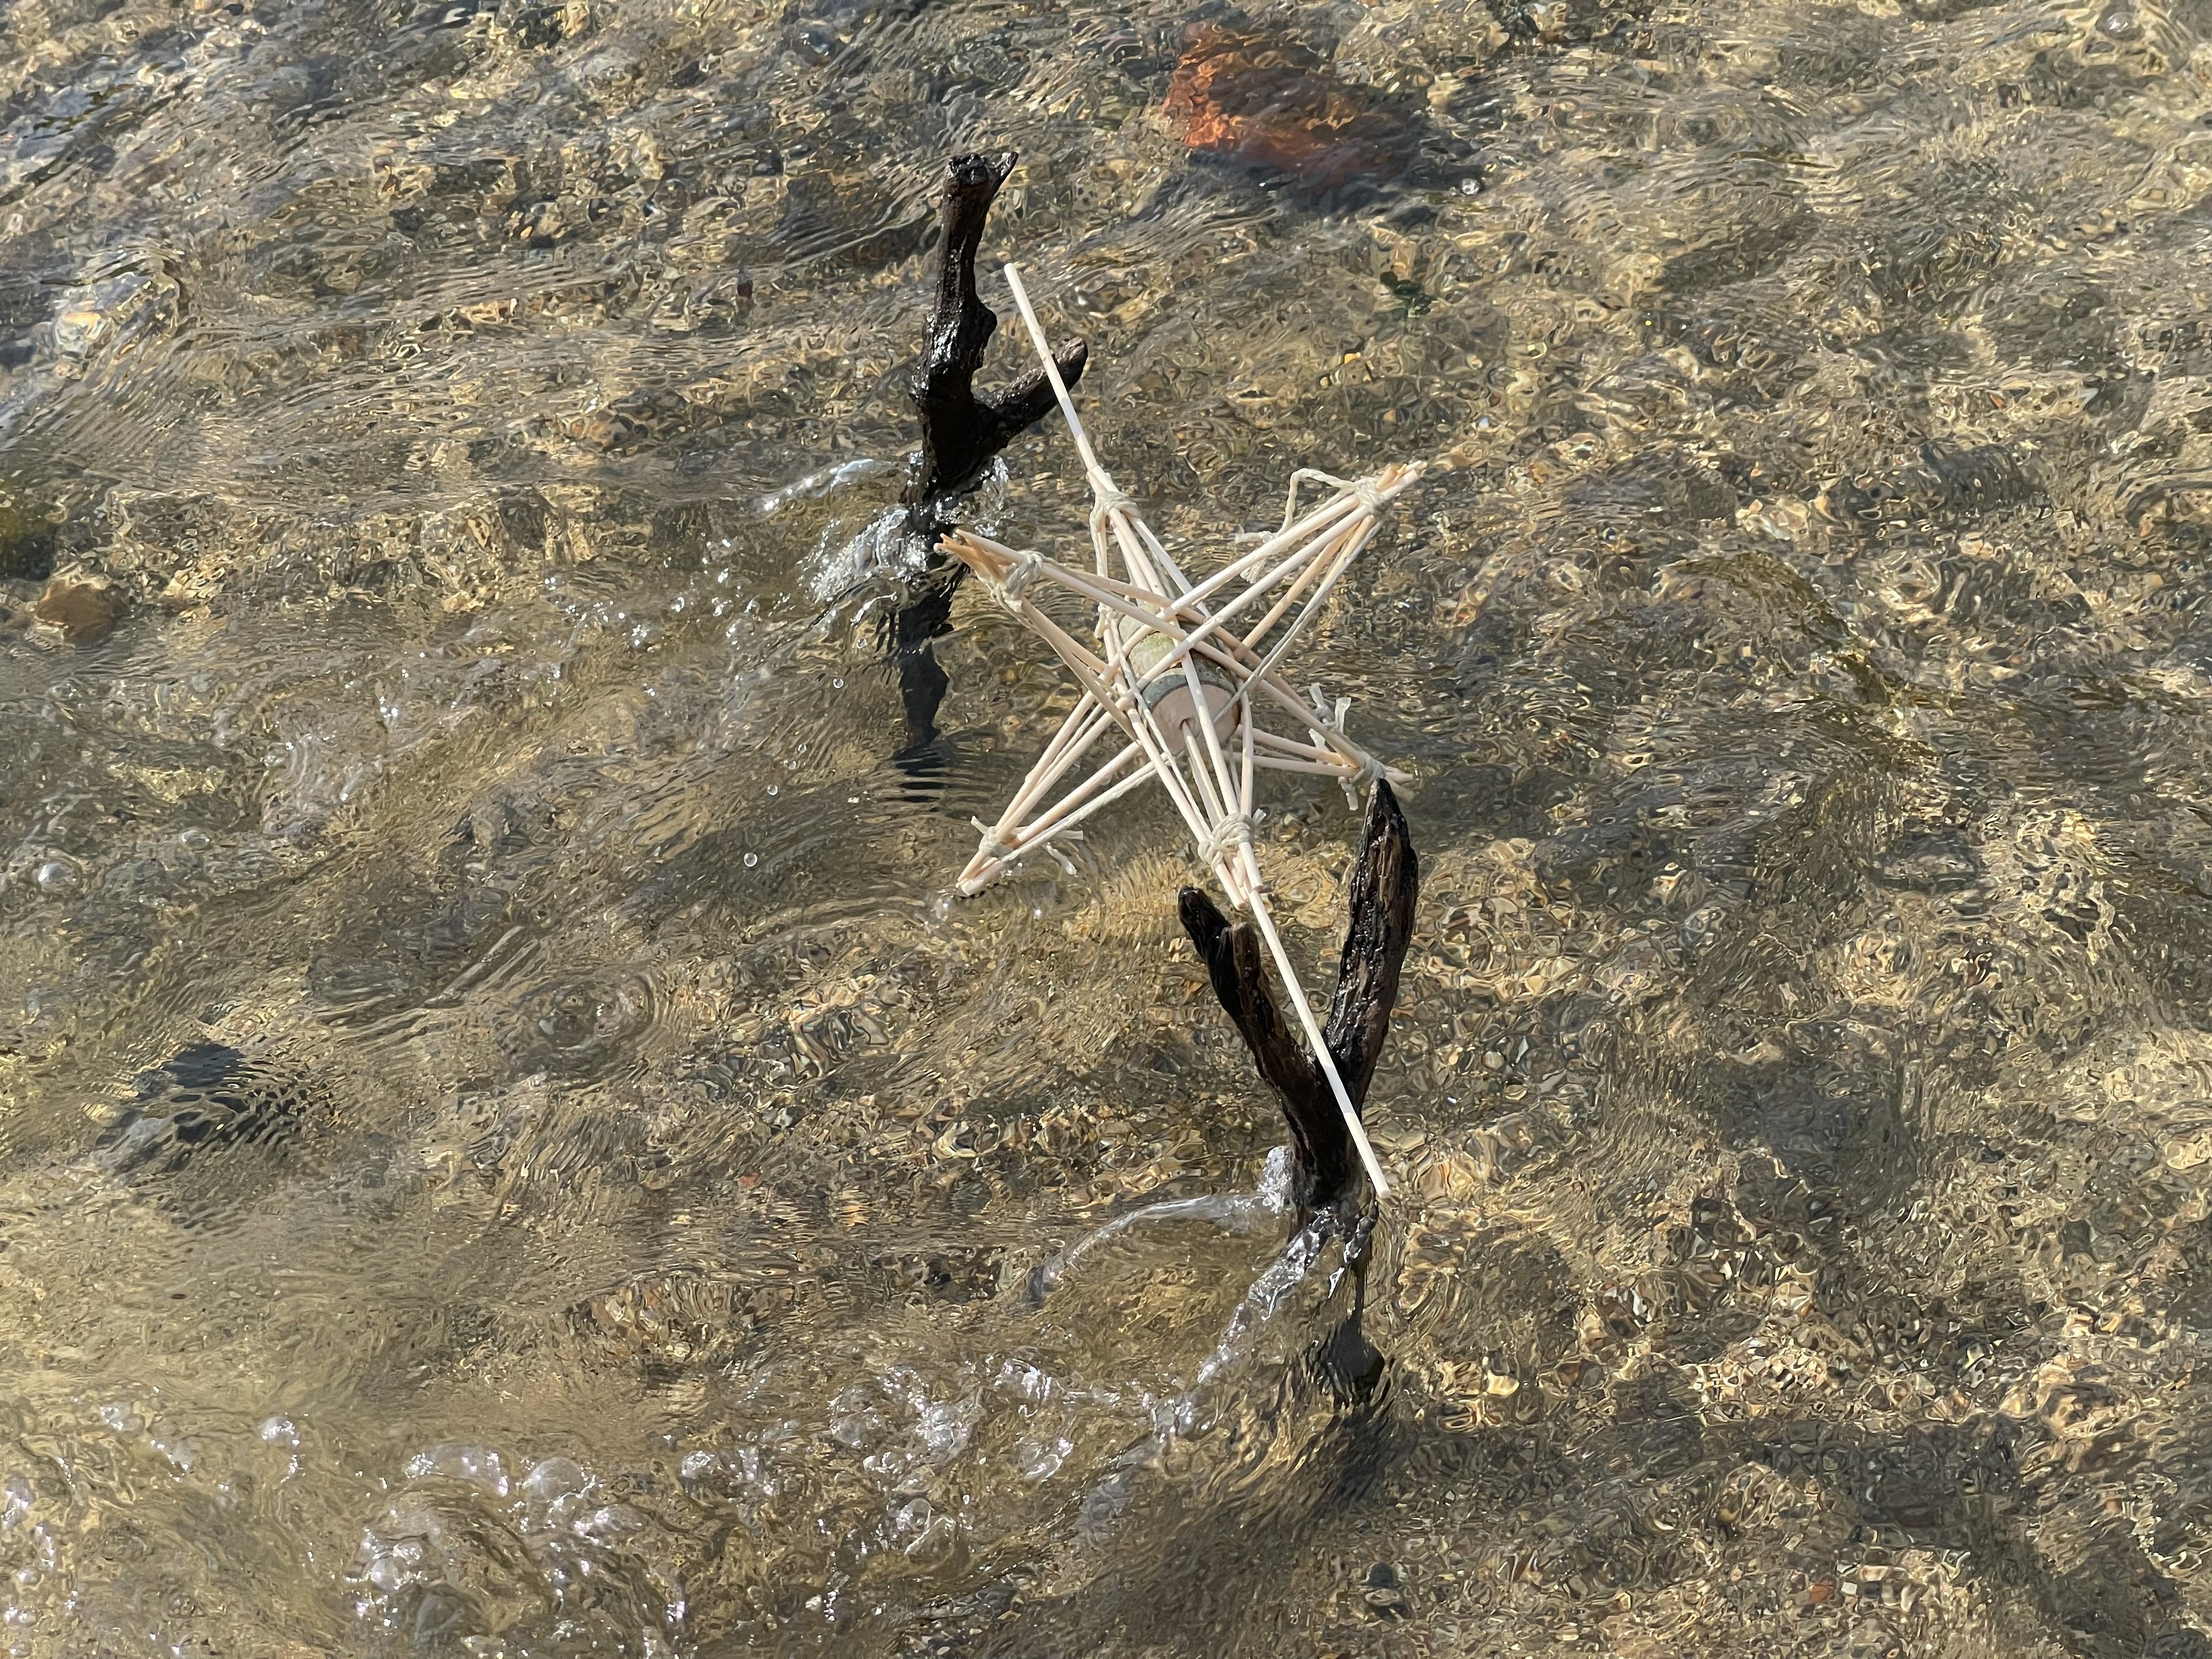 Driftwood and a star-shaped object partially submerged in clear, shallow water.